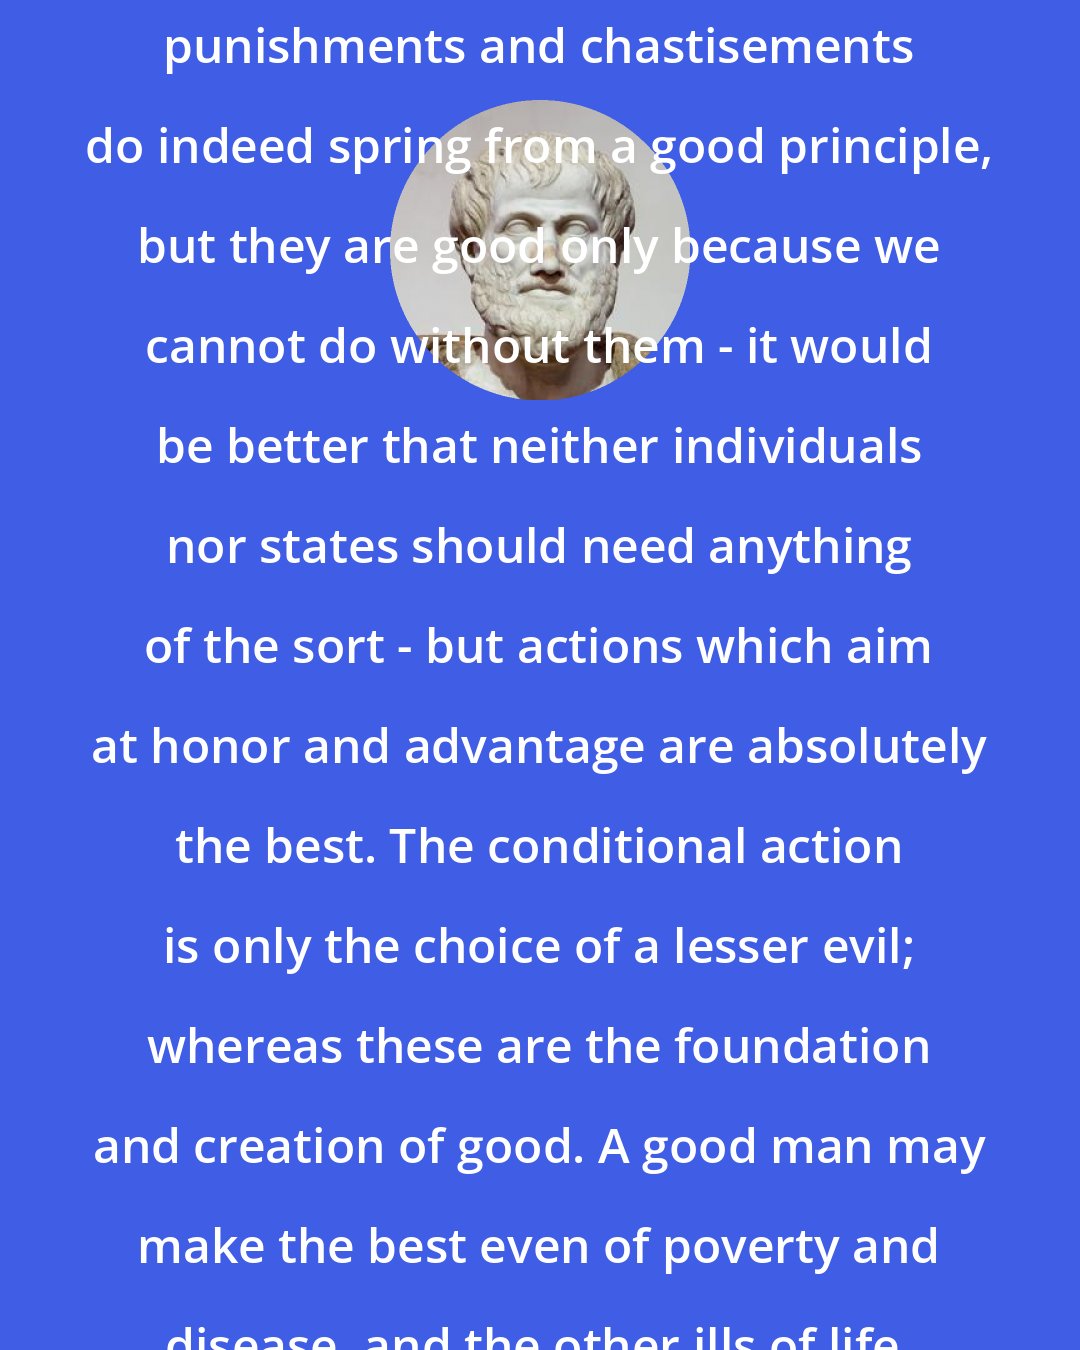 Aristotle: Take the case of just actions; just punishments and chastisements do indeed spring from a good principle, but they are good only because we cannot do without them - it would be better that neither individuals nor states should need anything of the sort - but actions which aim at honor and advantage are absolutely the best. The conditional action is only the choice of a lesser evil; whereas these are the foundation and creation of good. A good man may make the best even of poverty and disease, and the other ills of life.